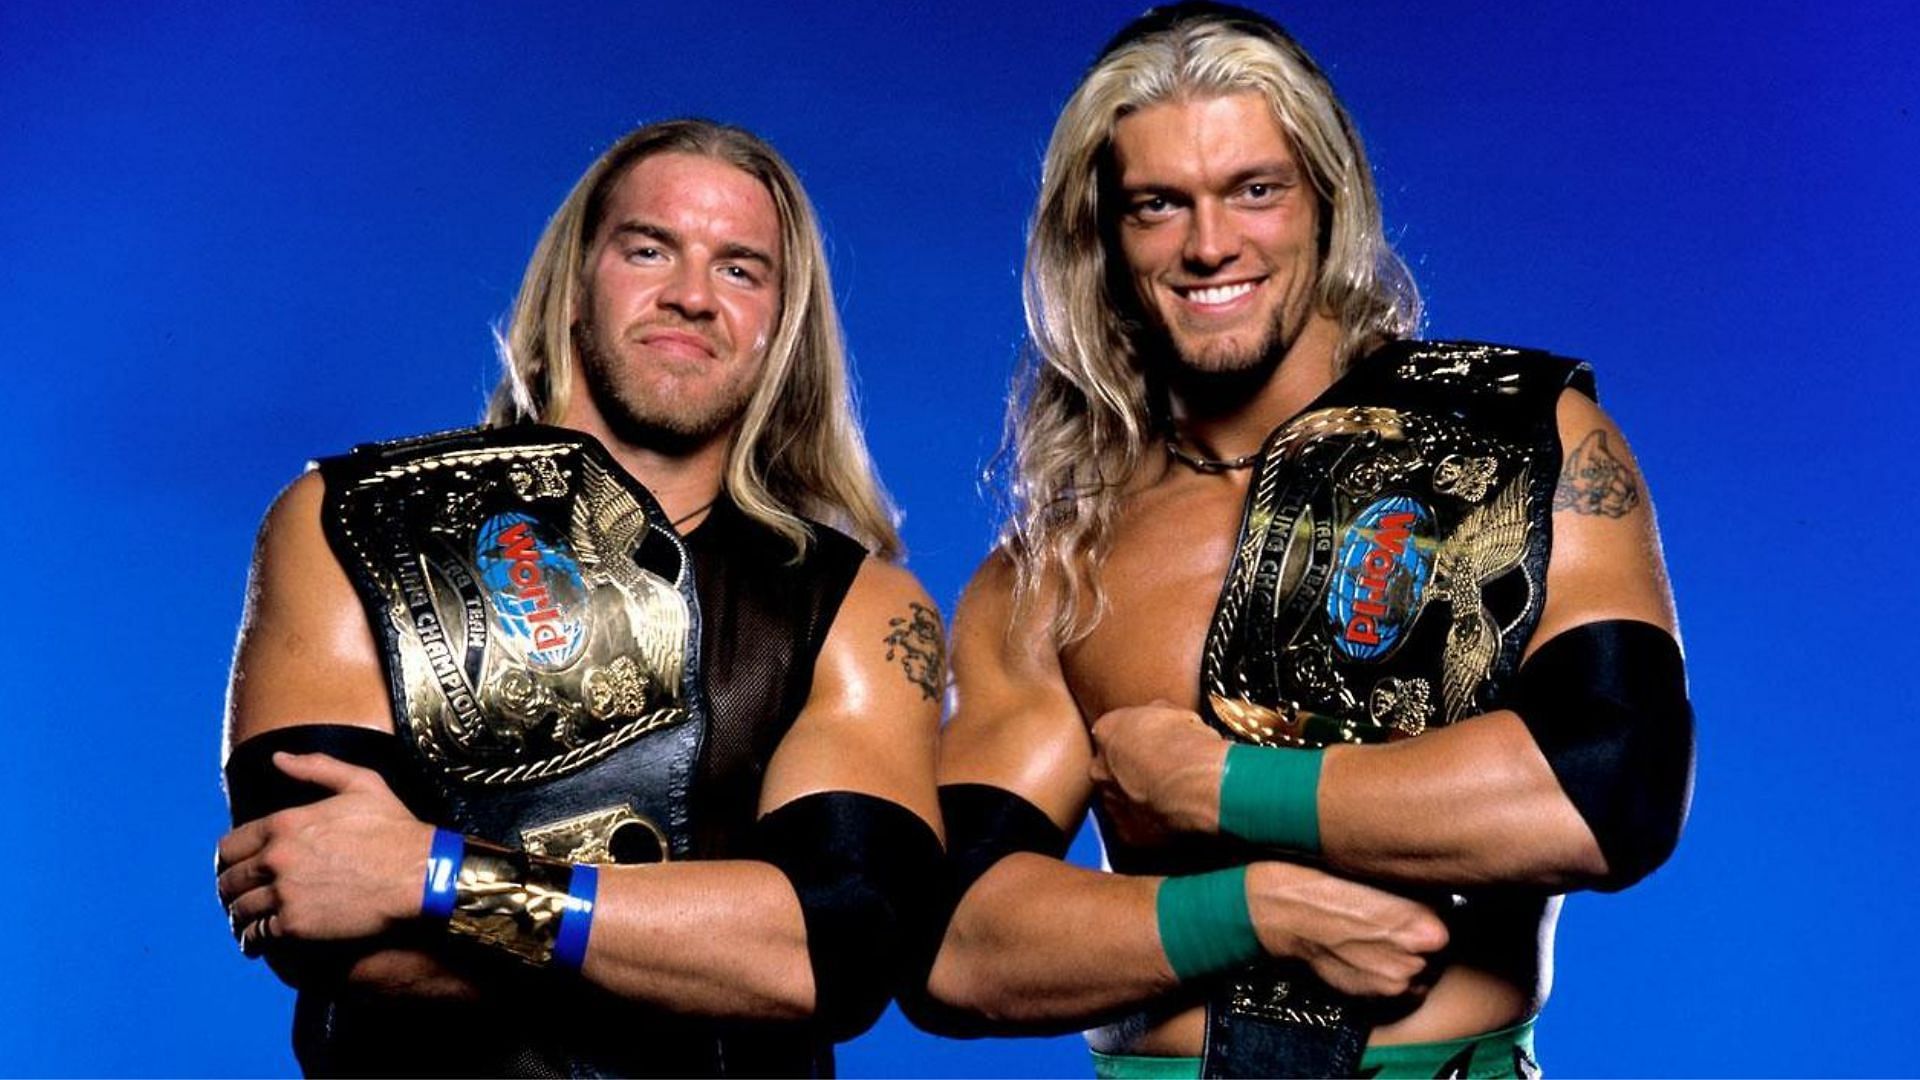 Christian (Left) and Edge (Right) with the WWF World Tag Team Championships.